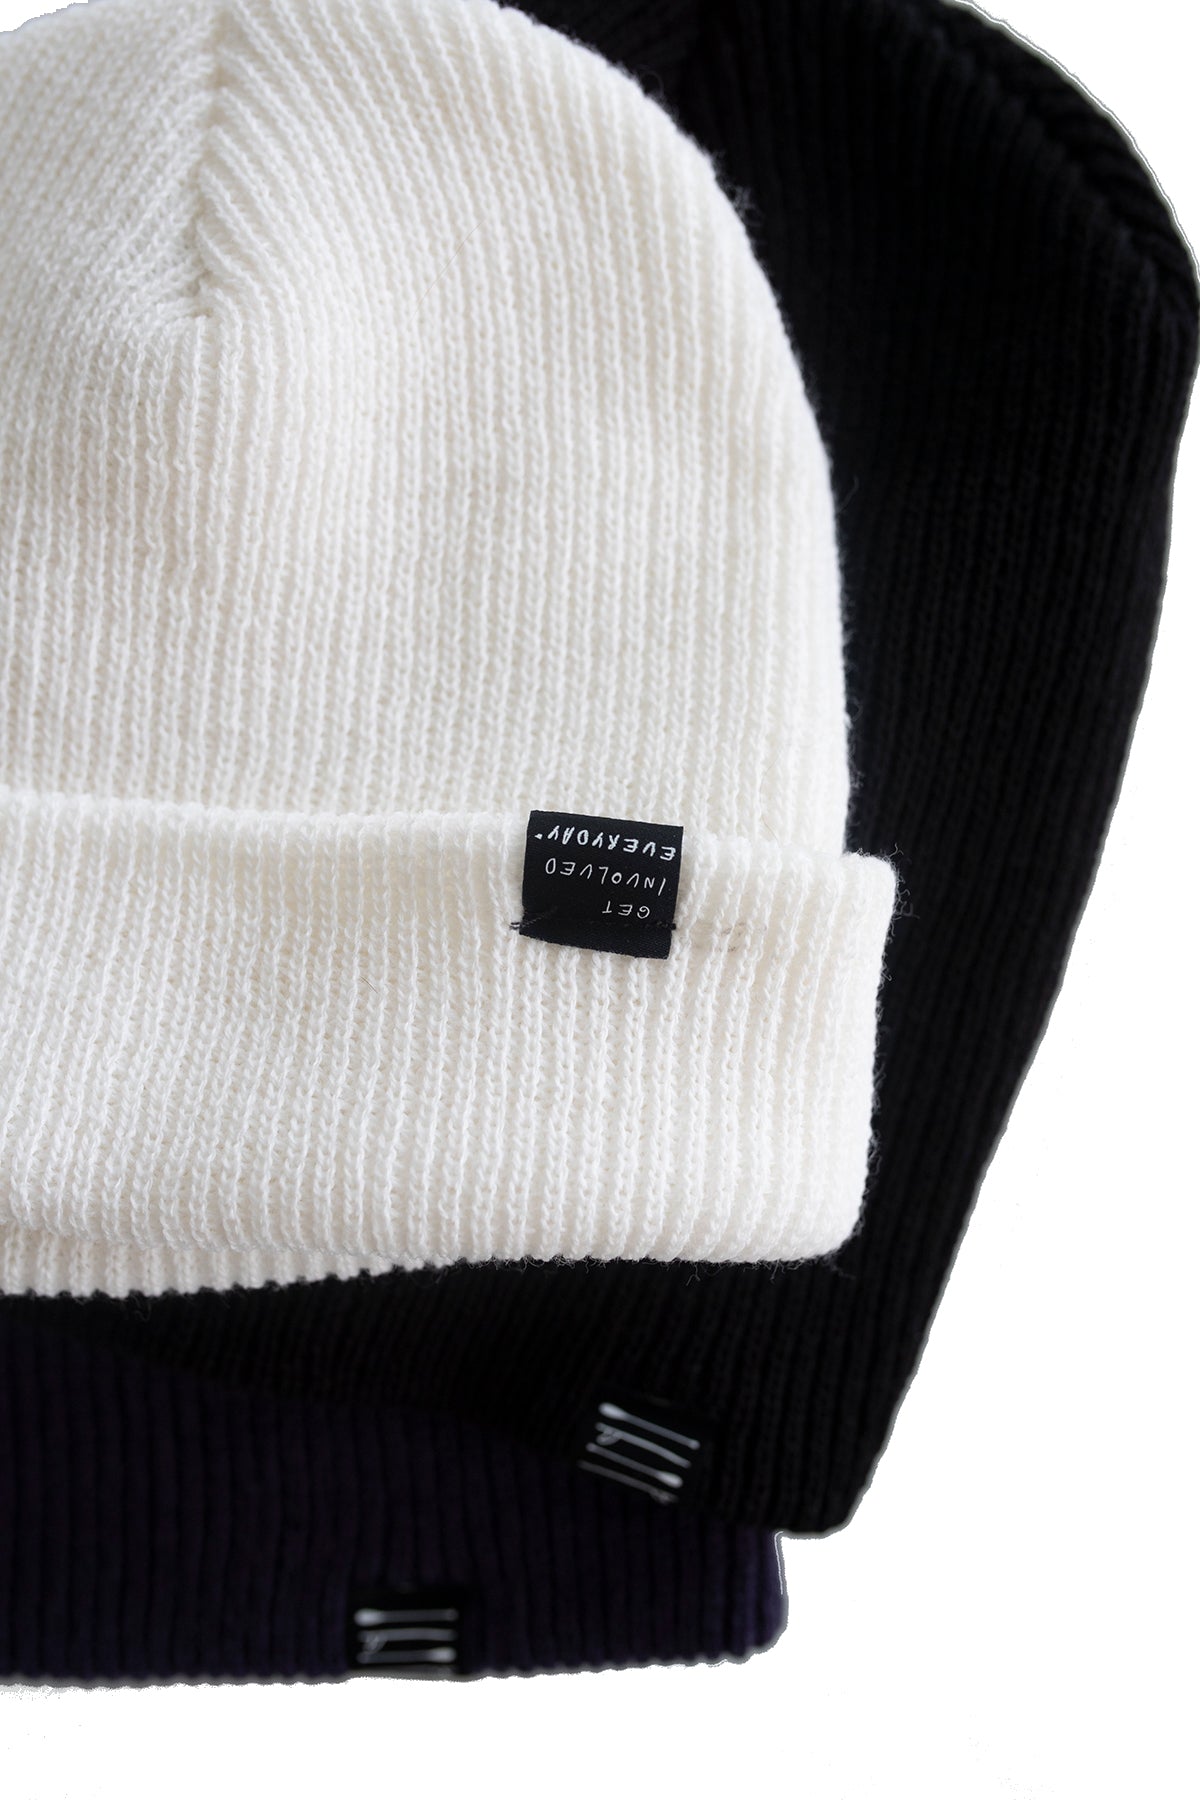 Super Soft Slouch Beanie - Classic logo Clamp Label